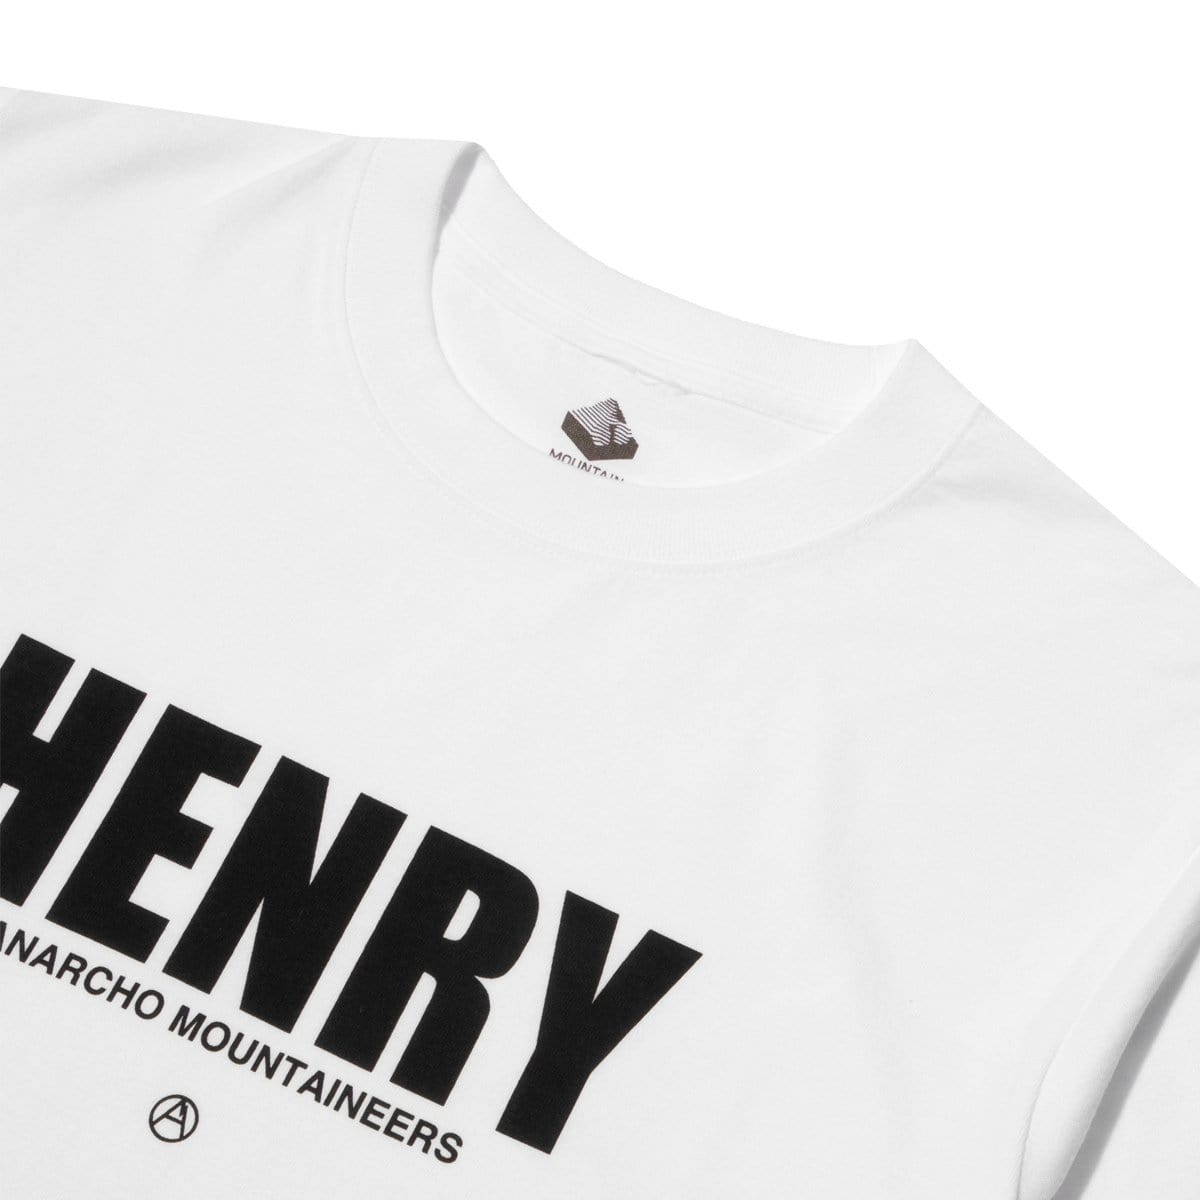 Mountain Research T-Shirts HENRY S/S TEE